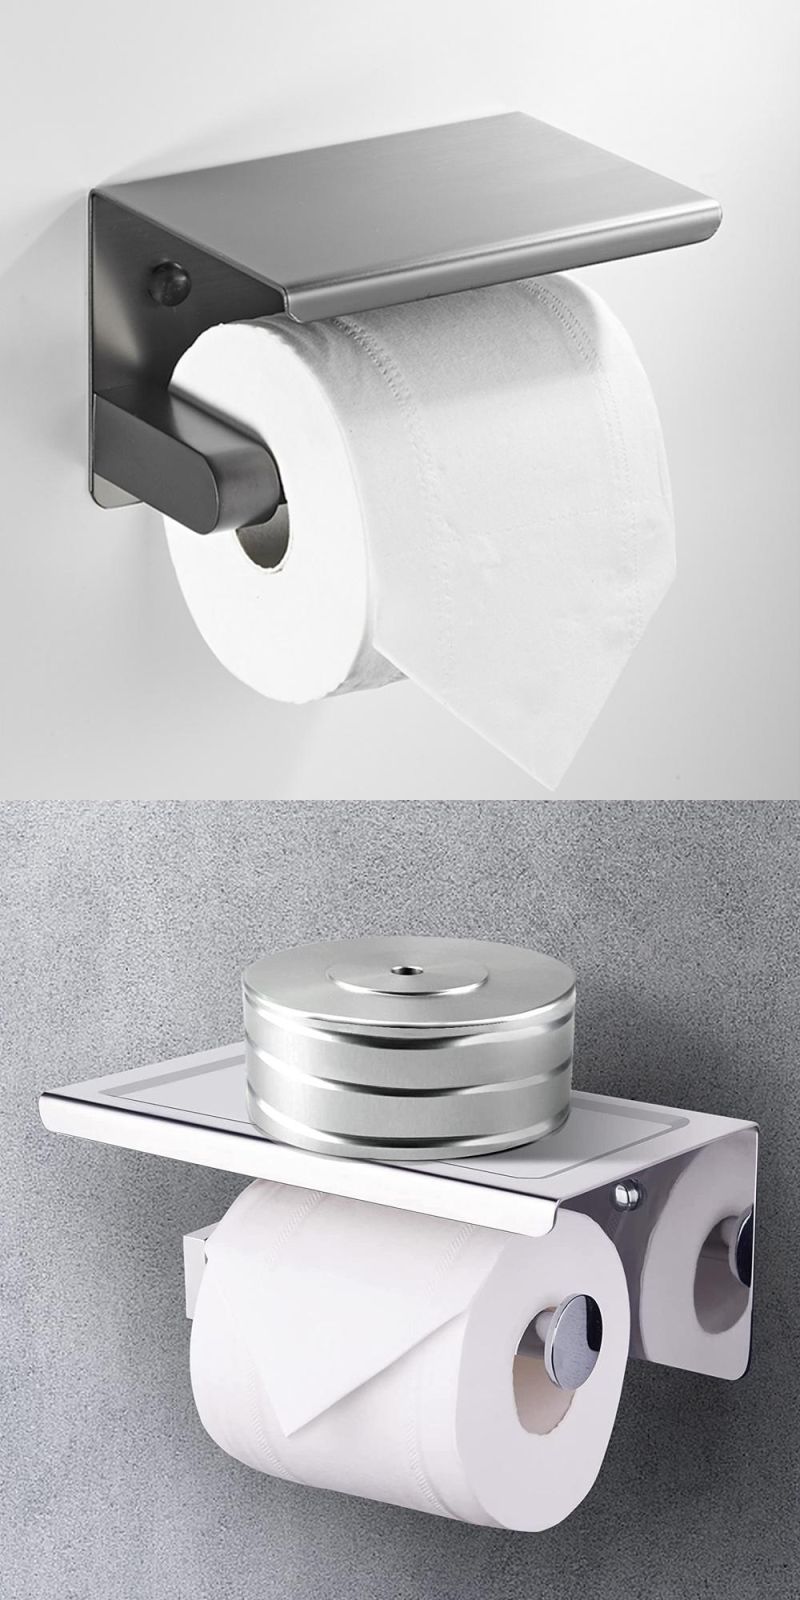 Toilet Paper Holder with Phone Shelf SUS 304 Stainless Steel Wall Mounted Toilet Paper Roll Holder Black